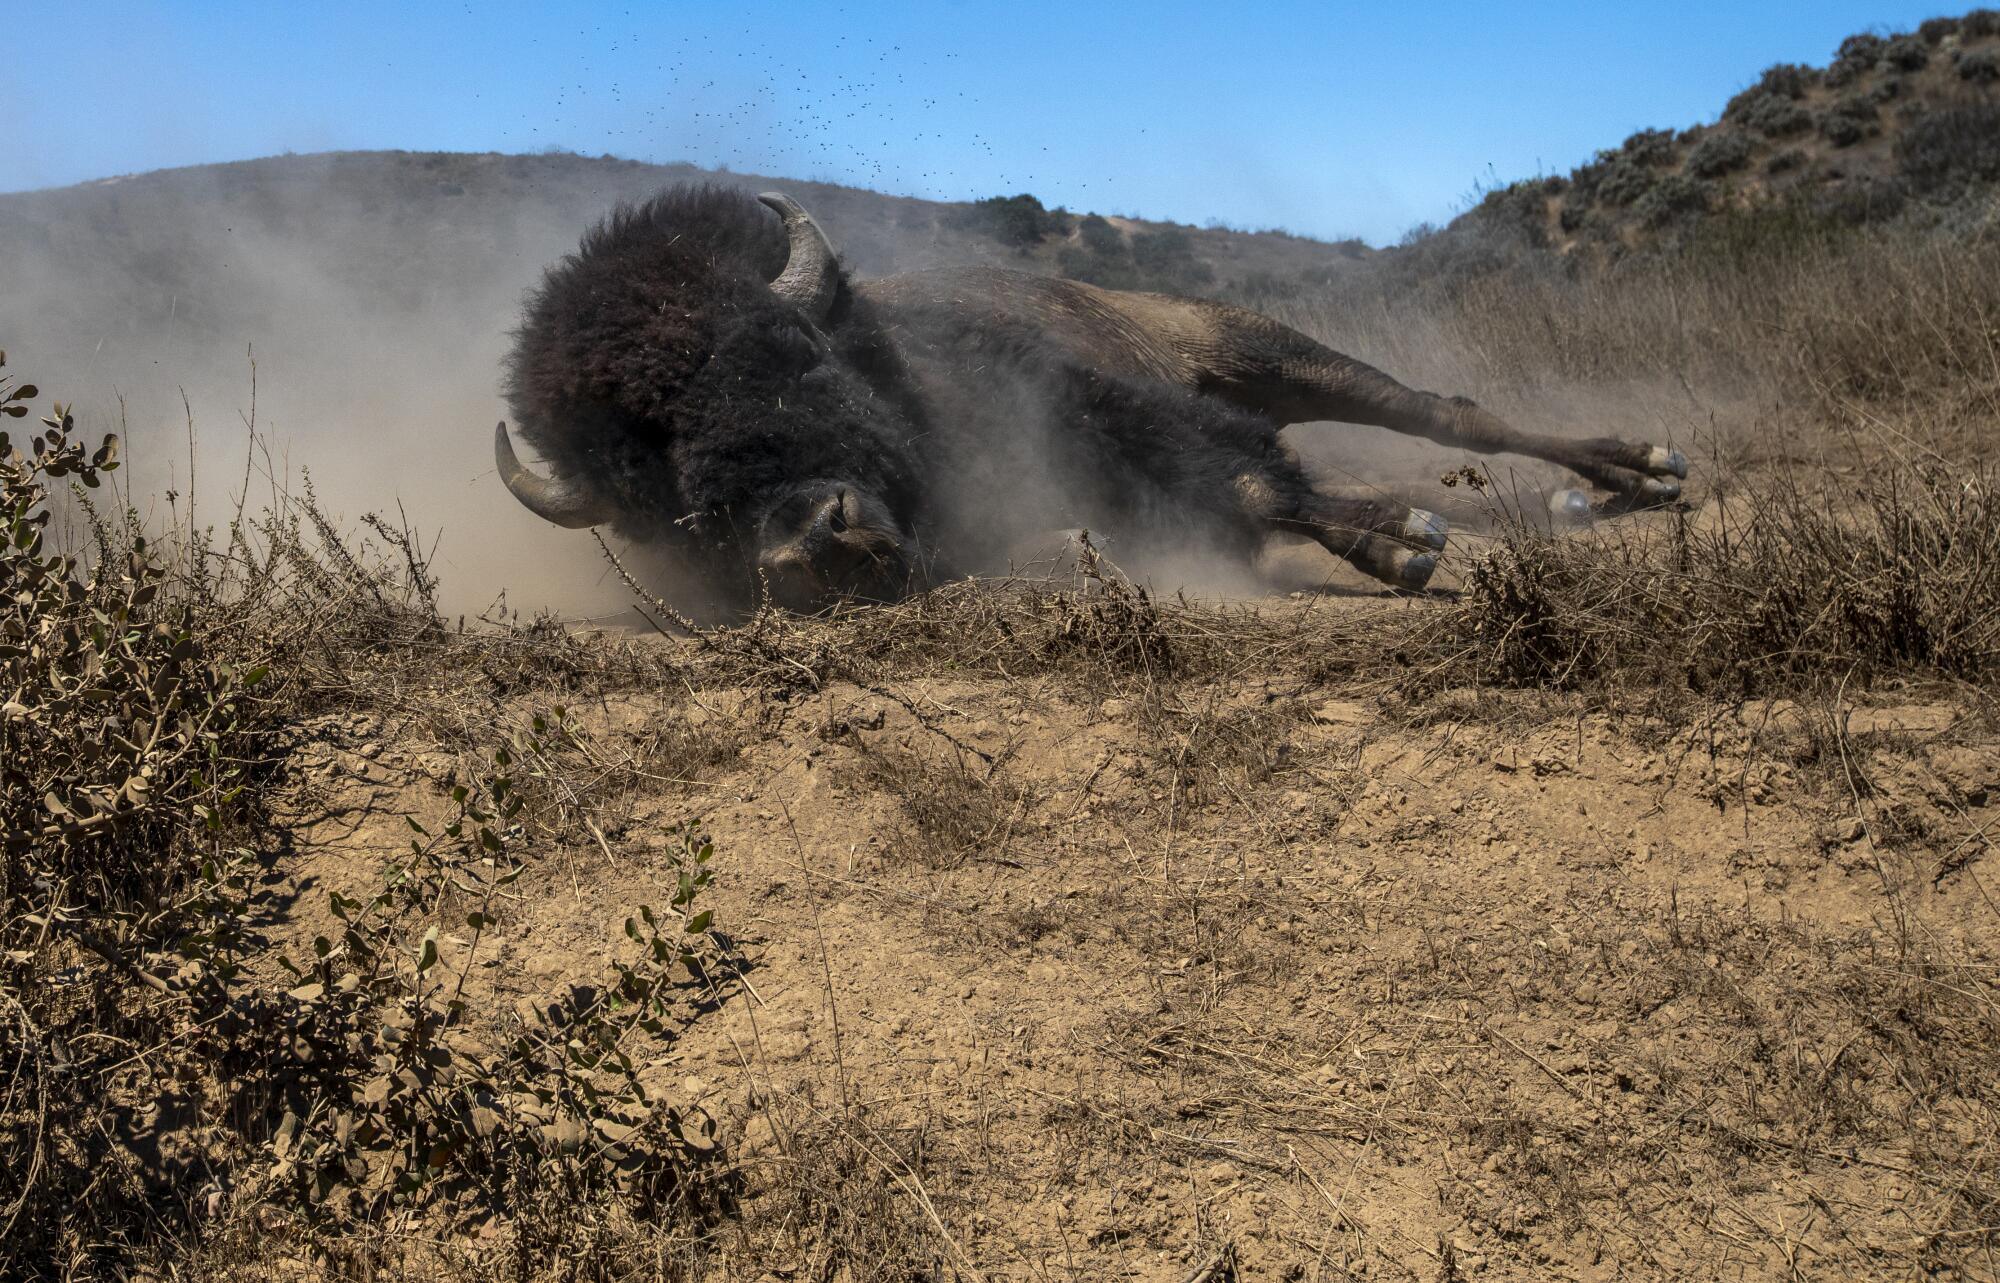 A bison wallows in dirt.